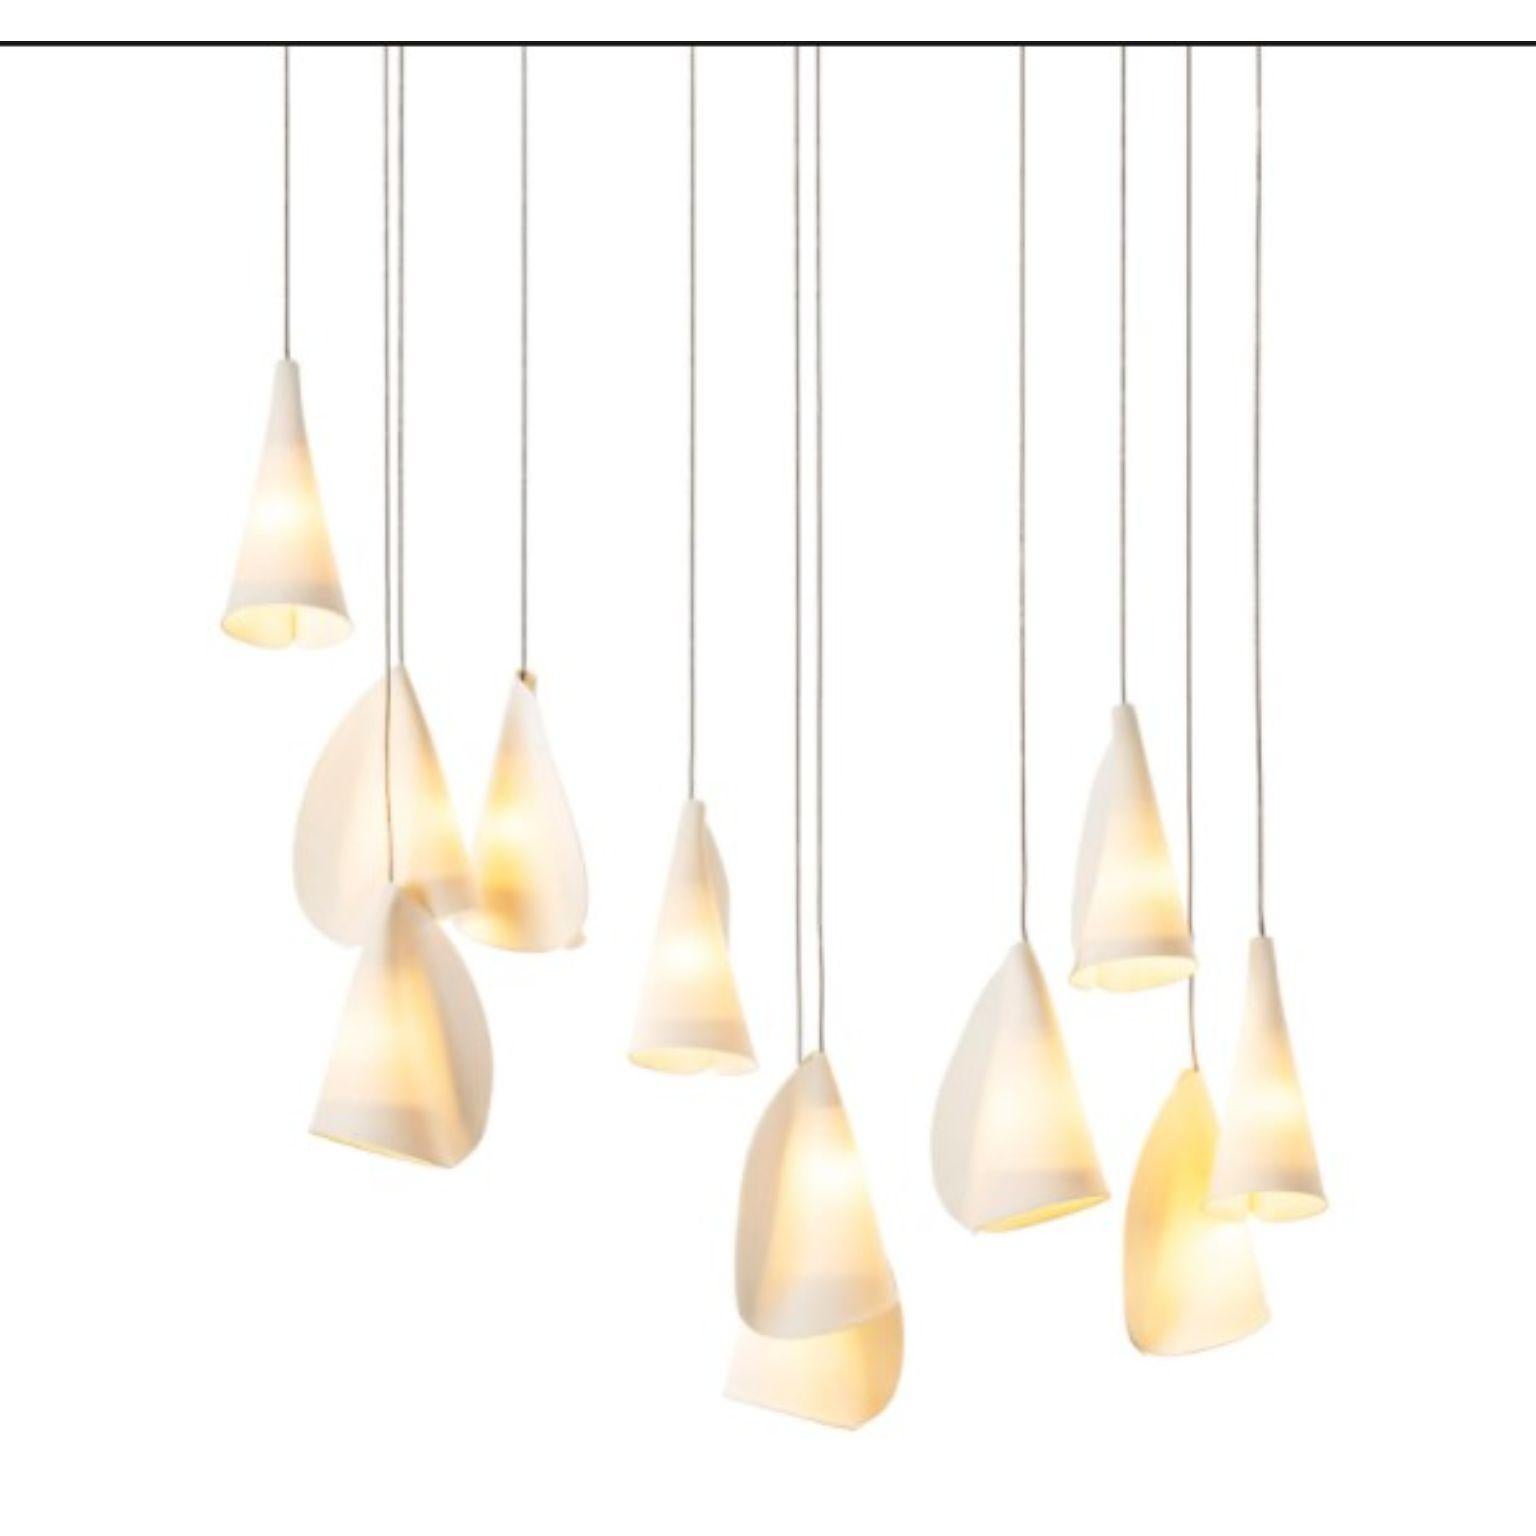 21.11 pendant by Bocci
Dimensions: D20.3 x H300 cm
Materials: white powder, coated square canopy
Weight:16.1 kg
Also available in different dimensions.

All our lamps can be wired according to each country. If sold to the USA it will be wired